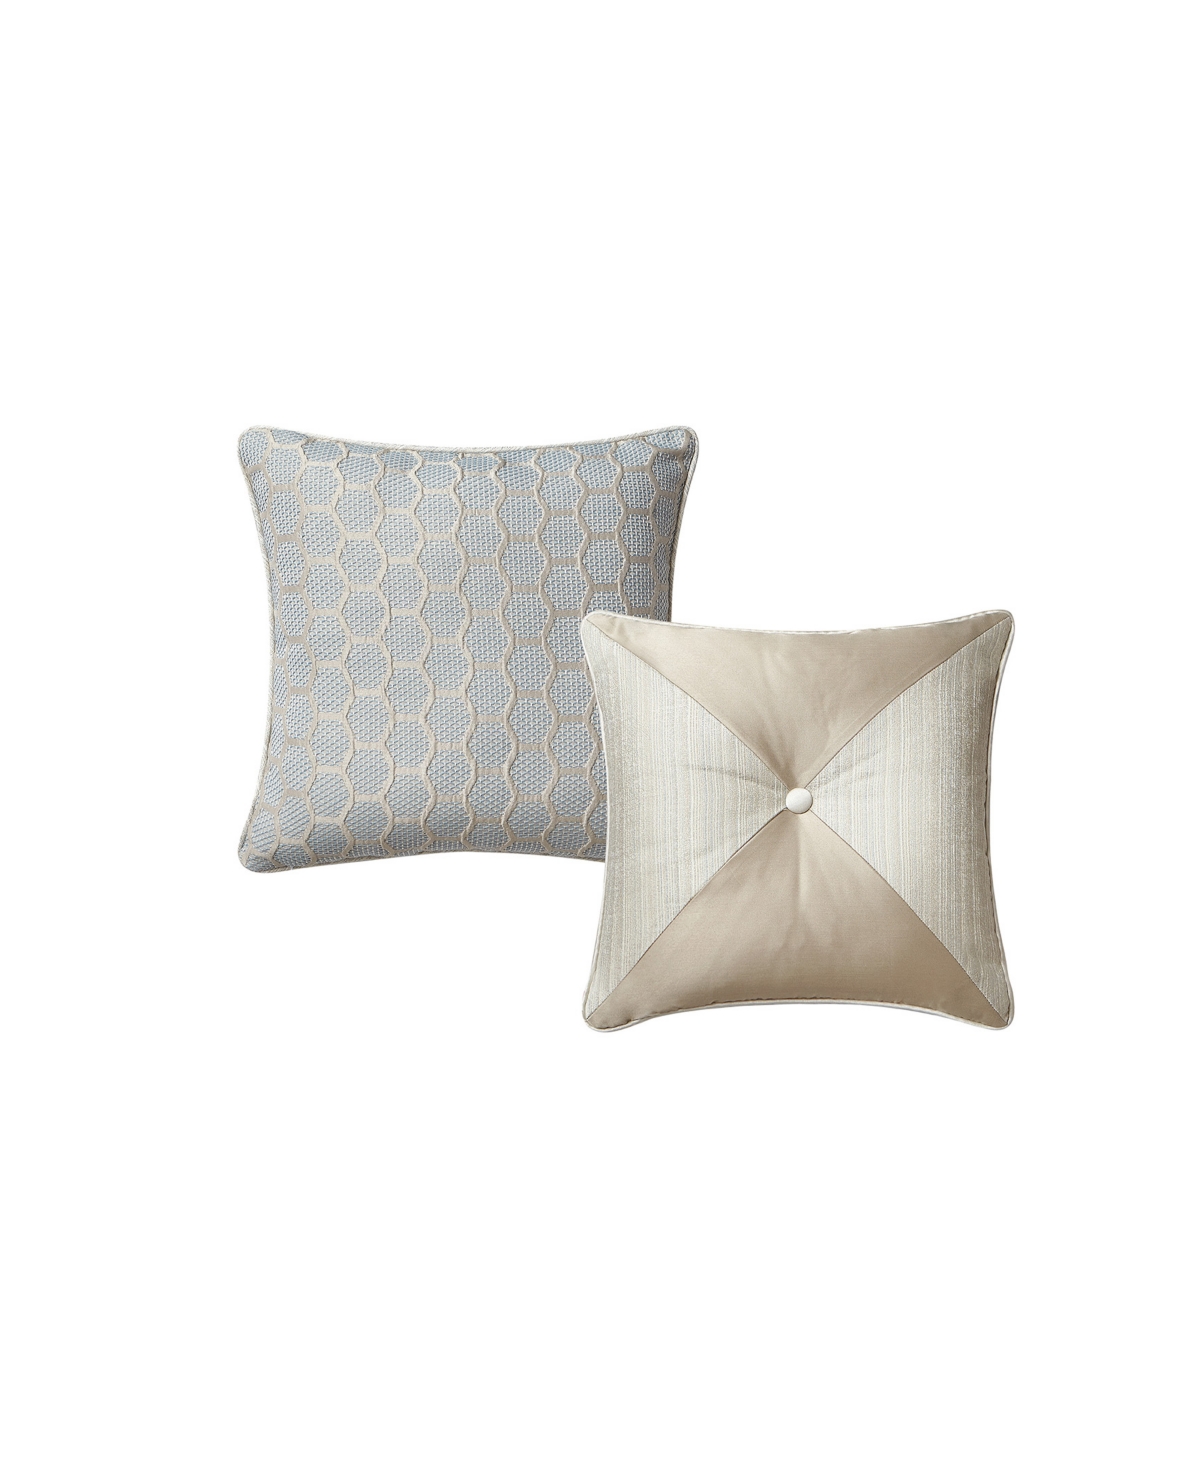 Shop Waterford Closeout!  Springdale Textured Reversible 2 Piece Decorative Pillow Set In Multi